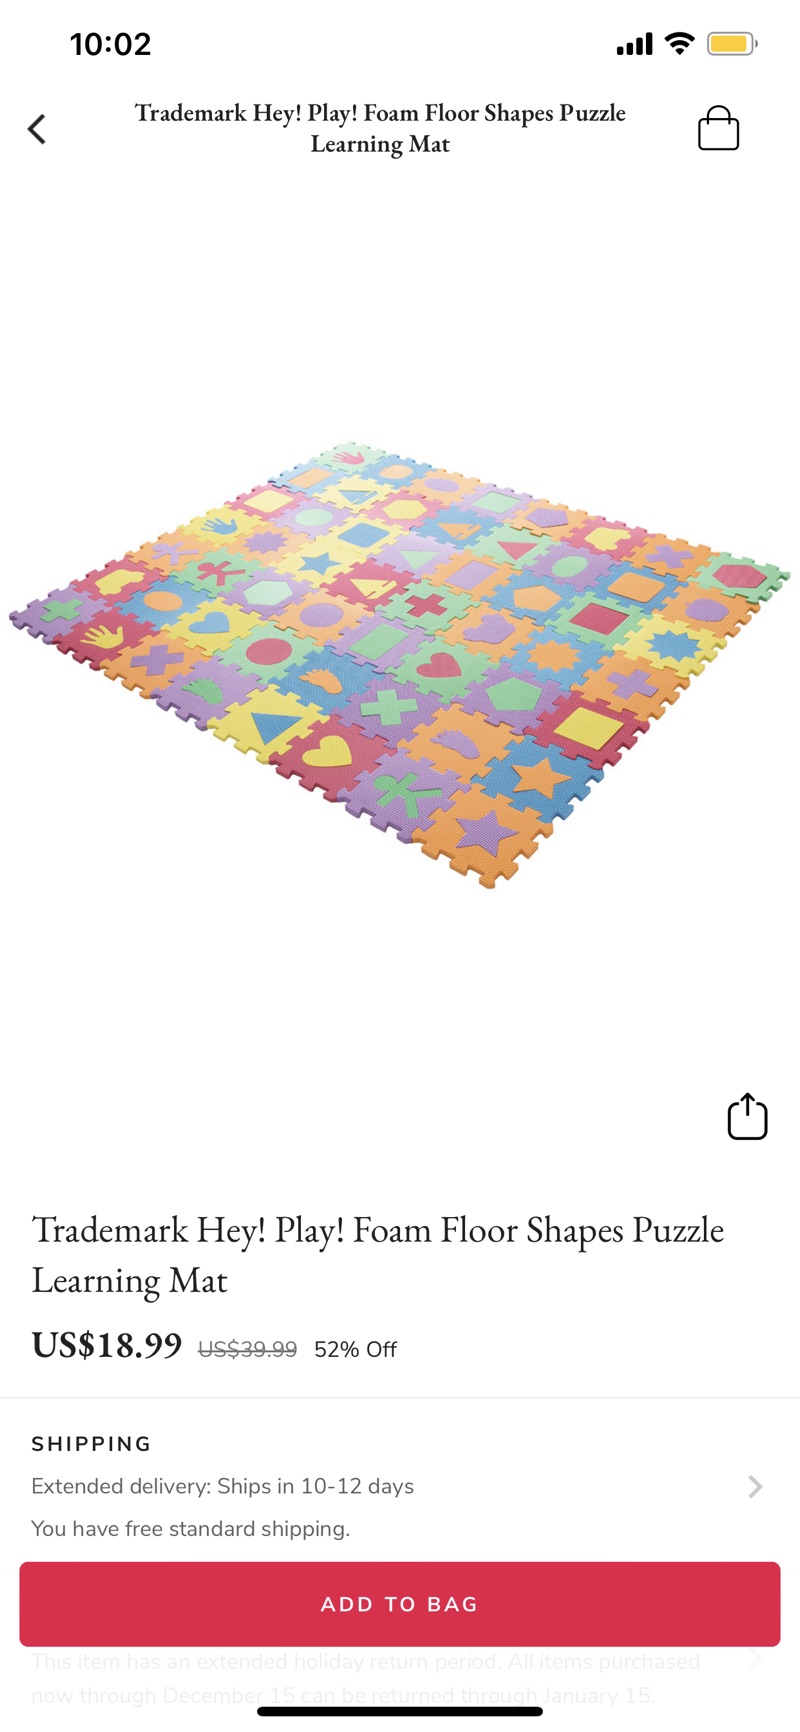 Trademark Hey! Play! Foam Floor Shapes Puzzle Learning Mat 爬爬垫